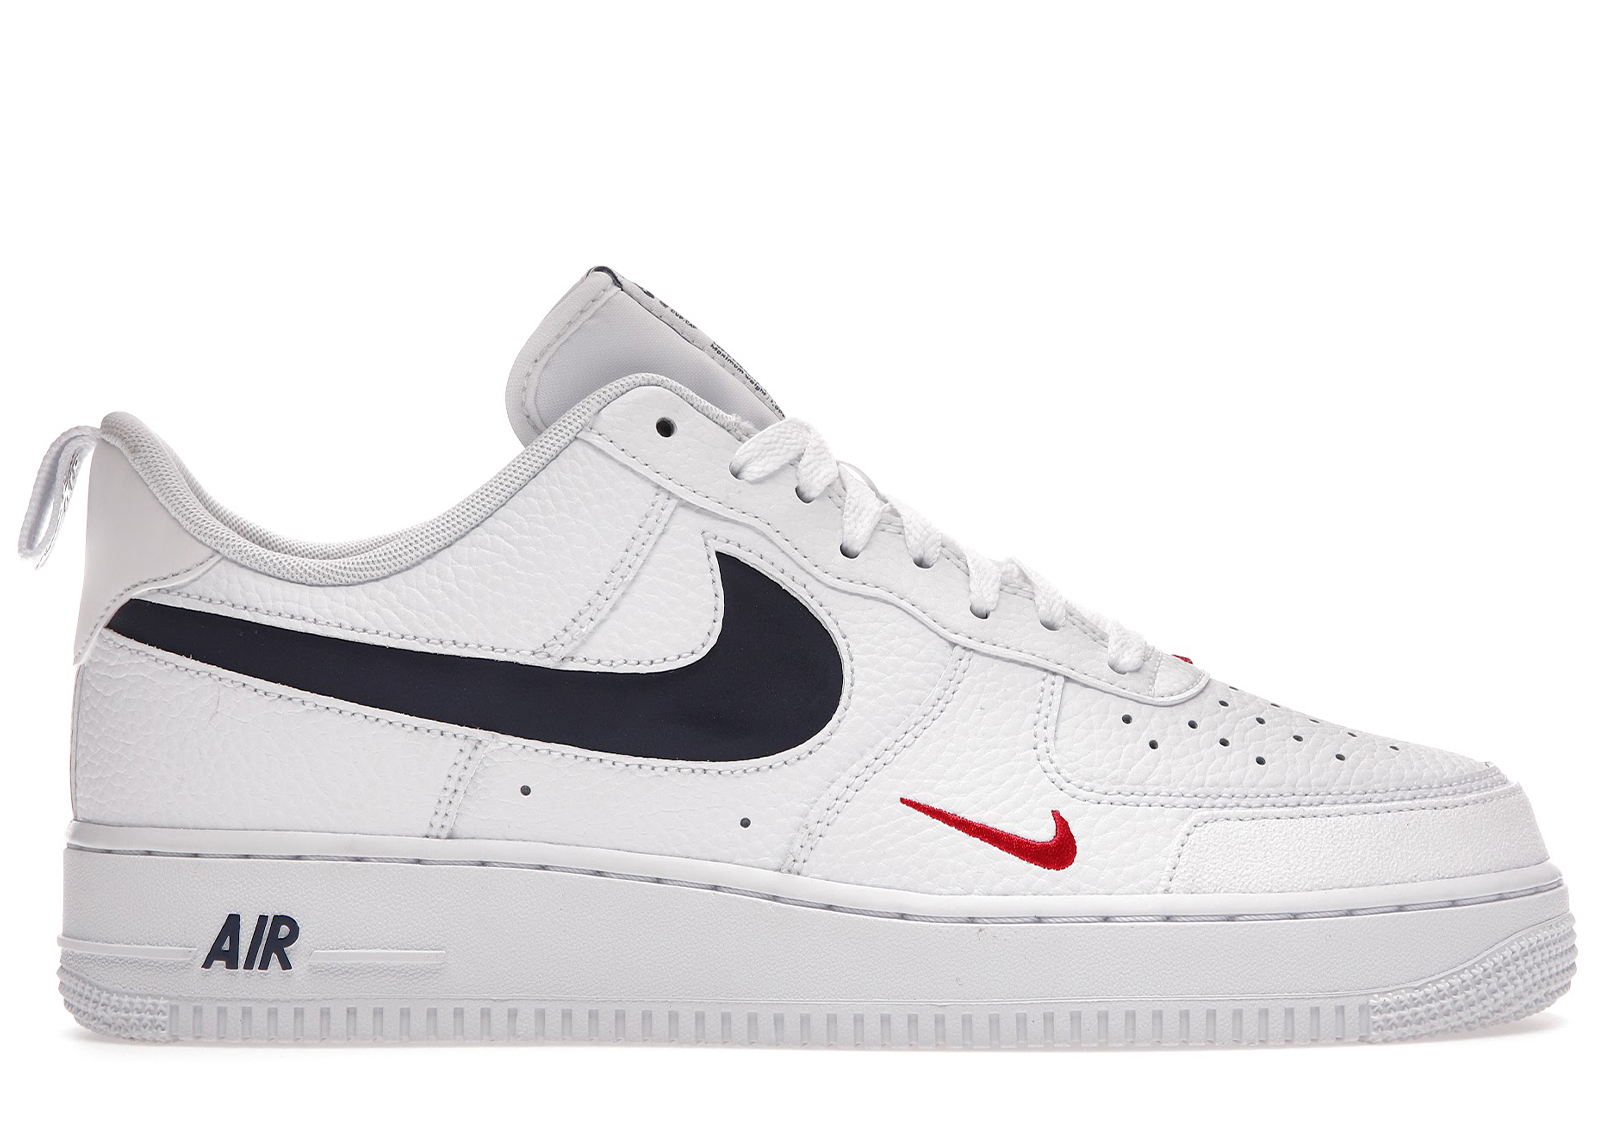 nike air force 1 patriots edition